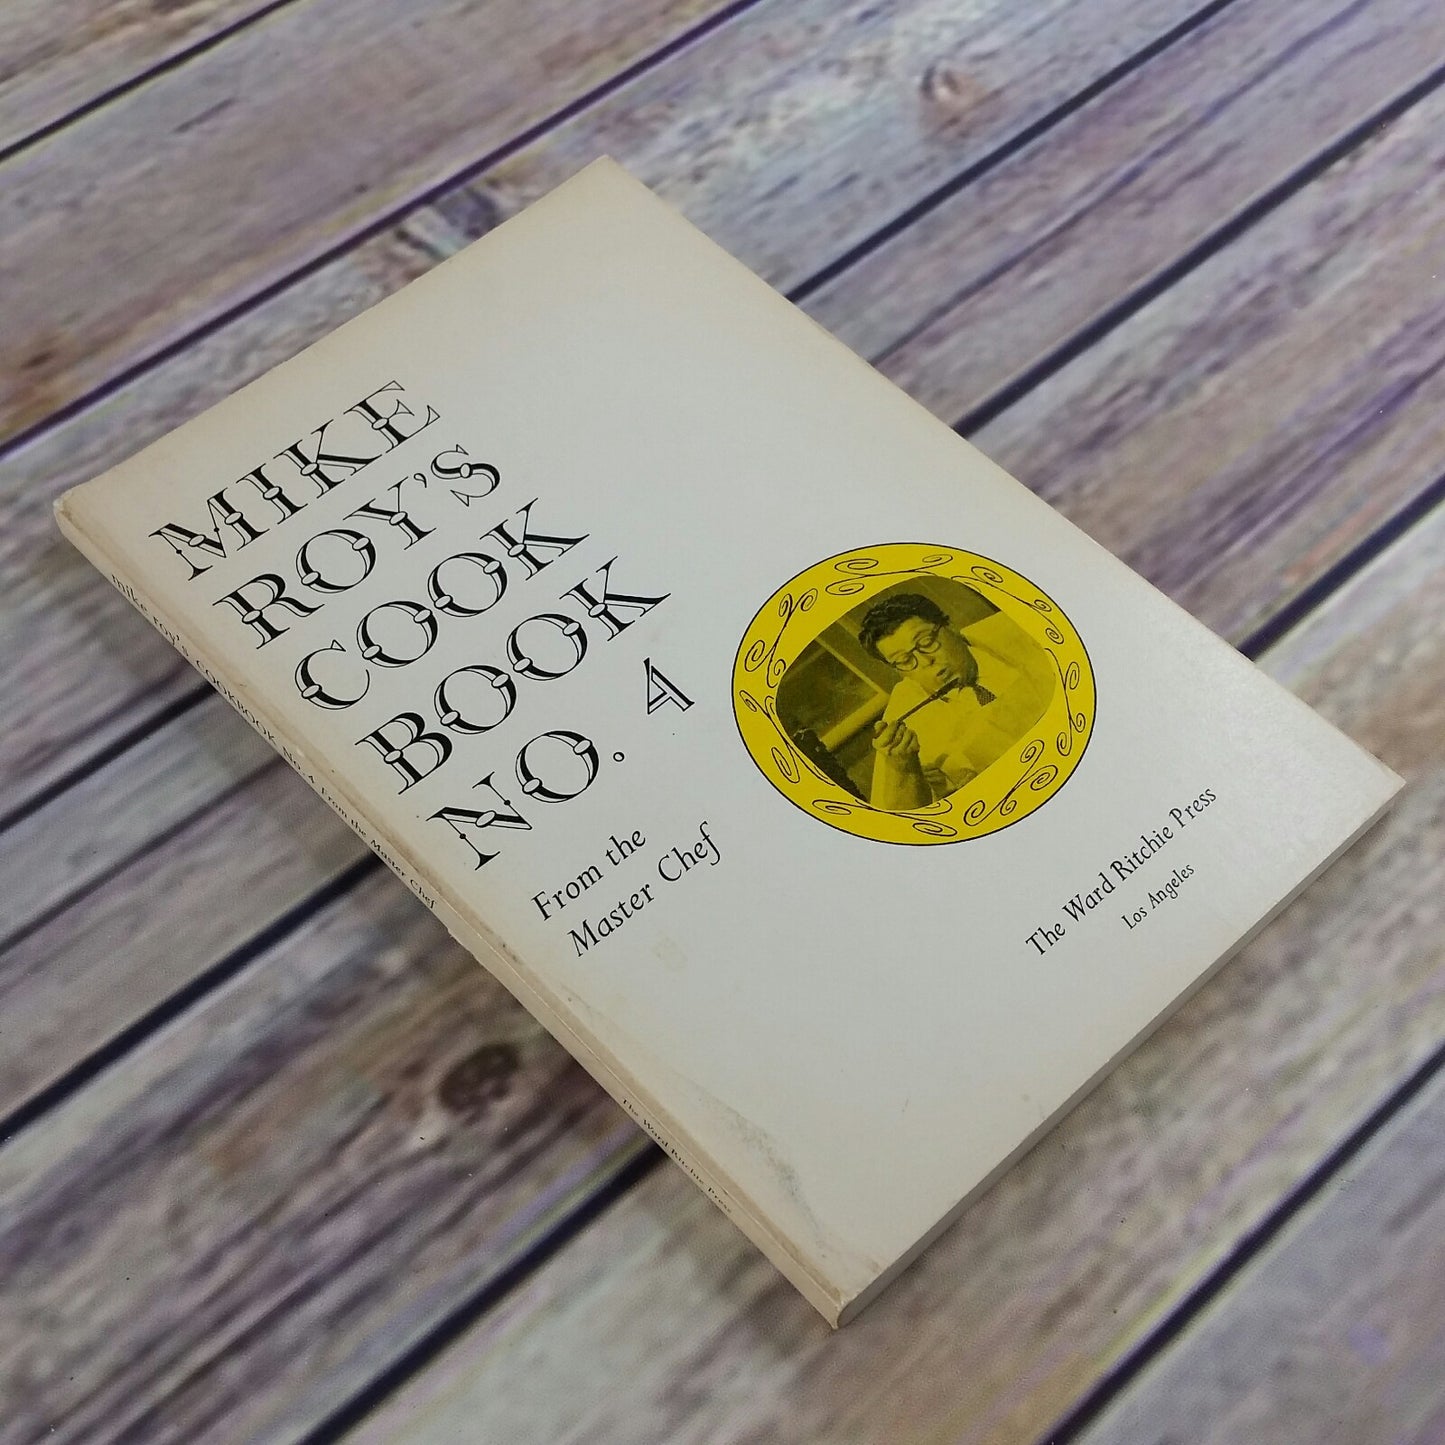 Vintage Mike Roy Cook Book No 4 Cooking Show Host Chef 1973 From the Master Chef Paperback - At Grandma's Table